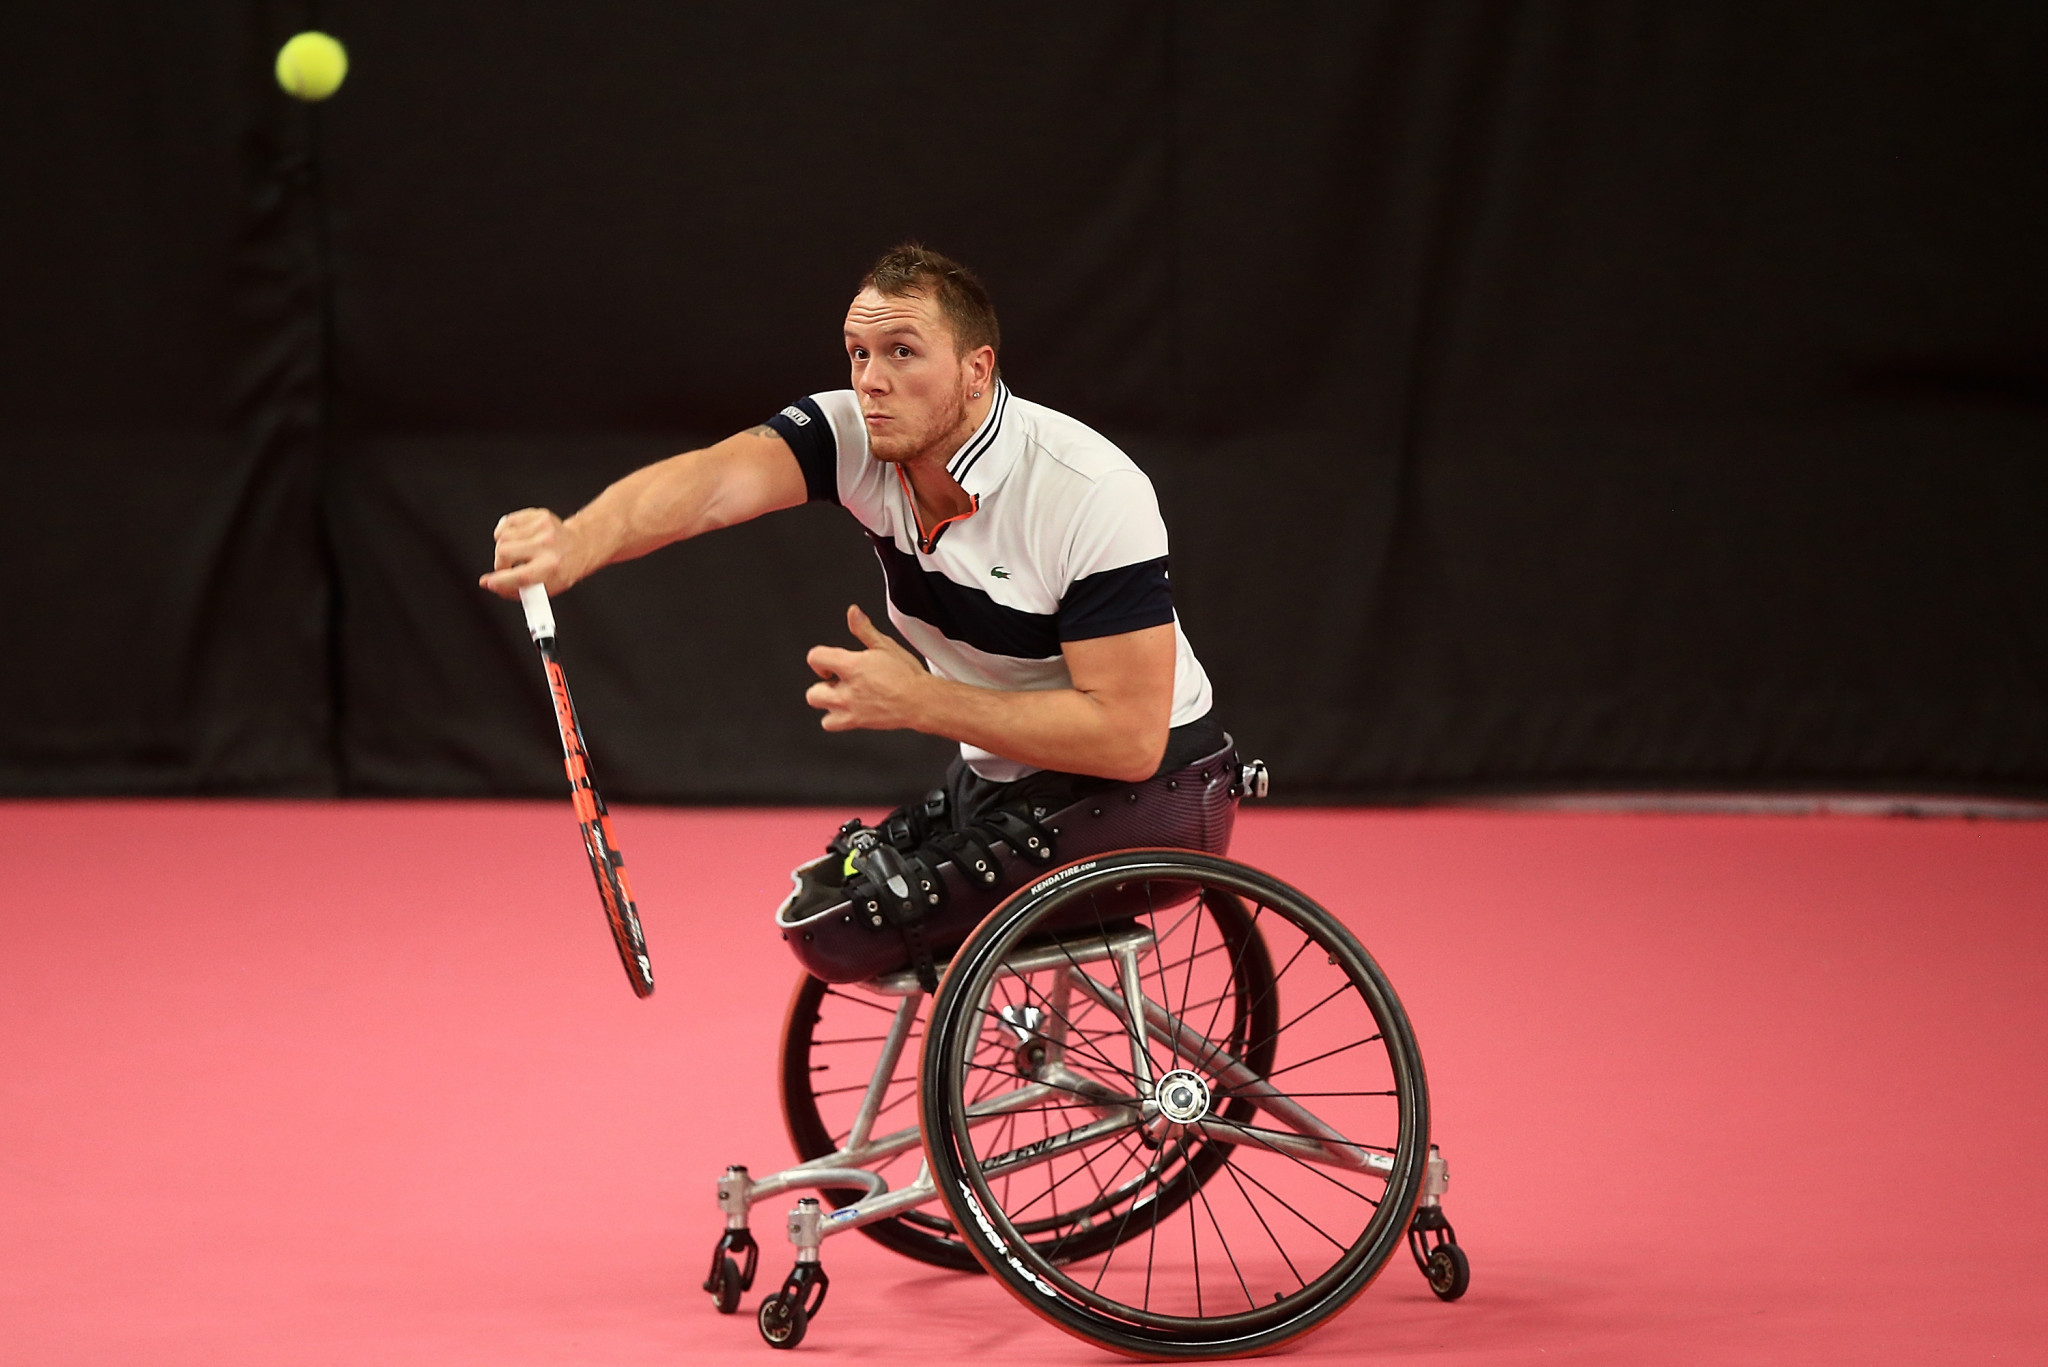 France continue strong start to Wheelchair Tennis World Team Cup